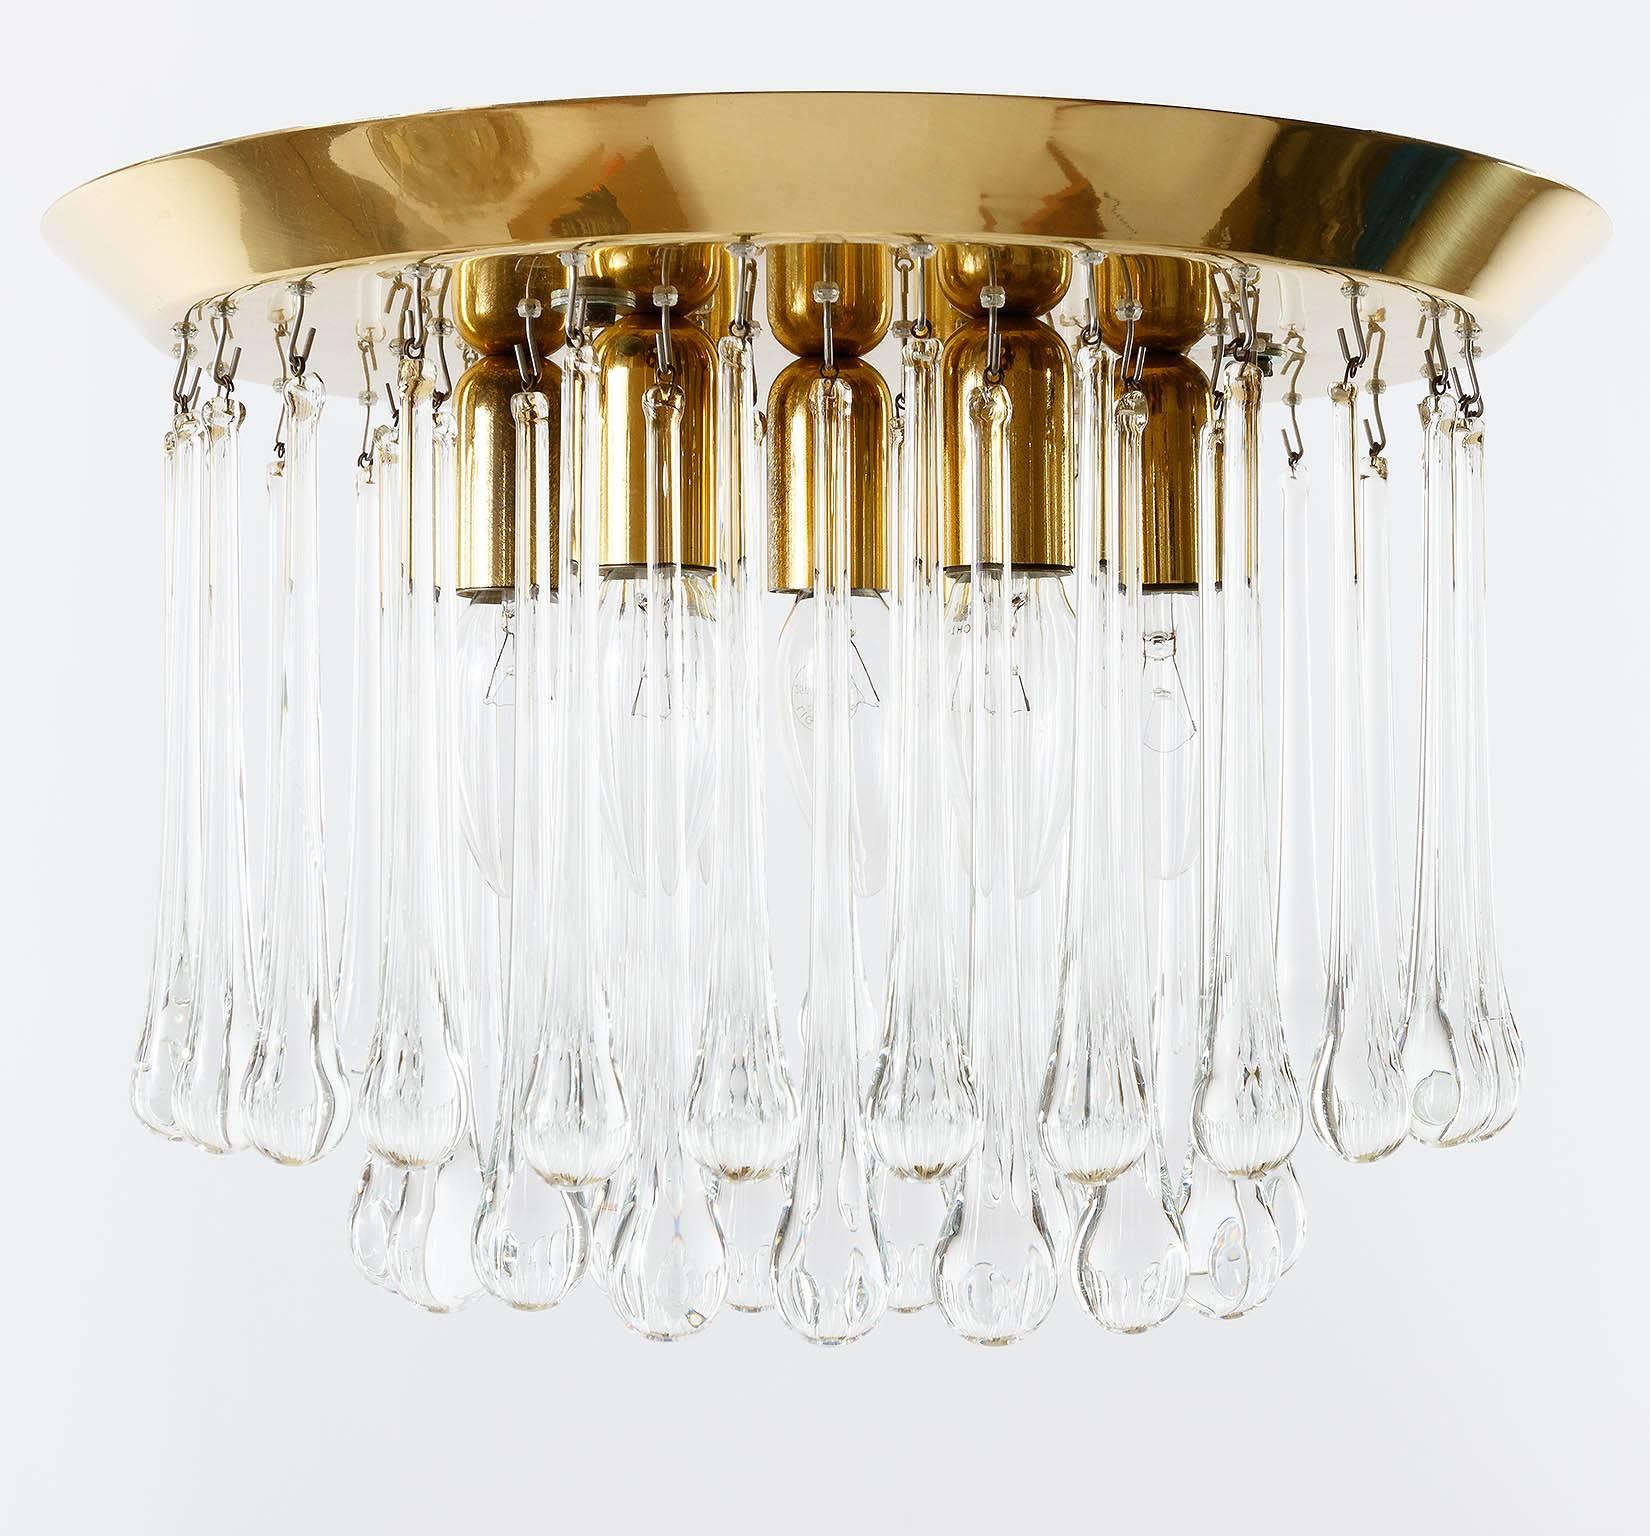 A rare and handmade high quality light fixture by J.T. Kalmar, Austria, manufactured in Mid-Century, circa 1970 (1960s-1970s). It is made of polished brass and teardrop shaped crystal glasses. It takes seven small base bulbs (max. 40 W per bulb).